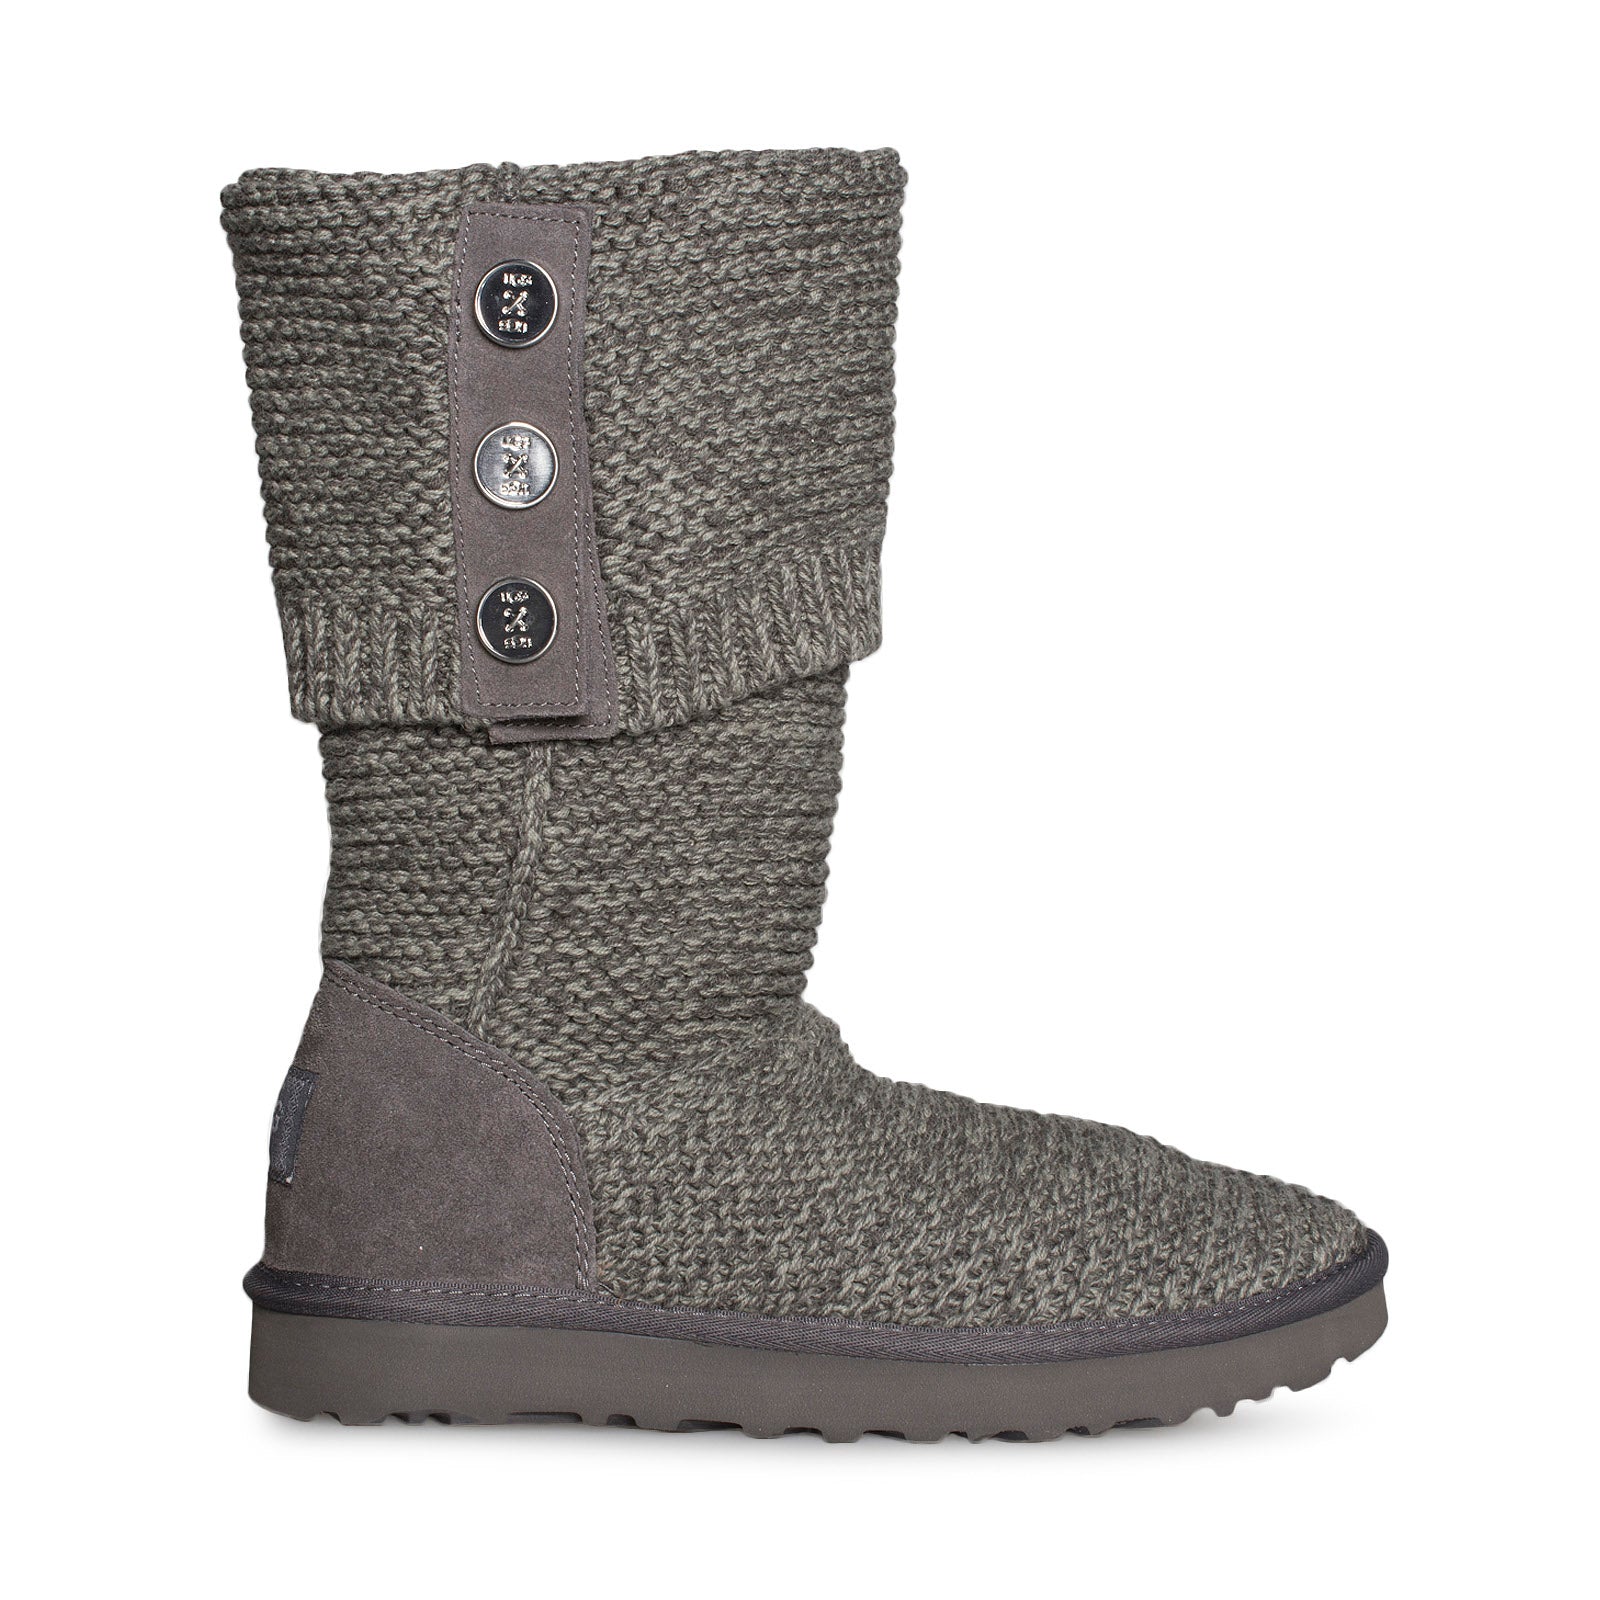 UGG Purl Cardy Knit Charcoal Boots - Women's - MyCozyBoots